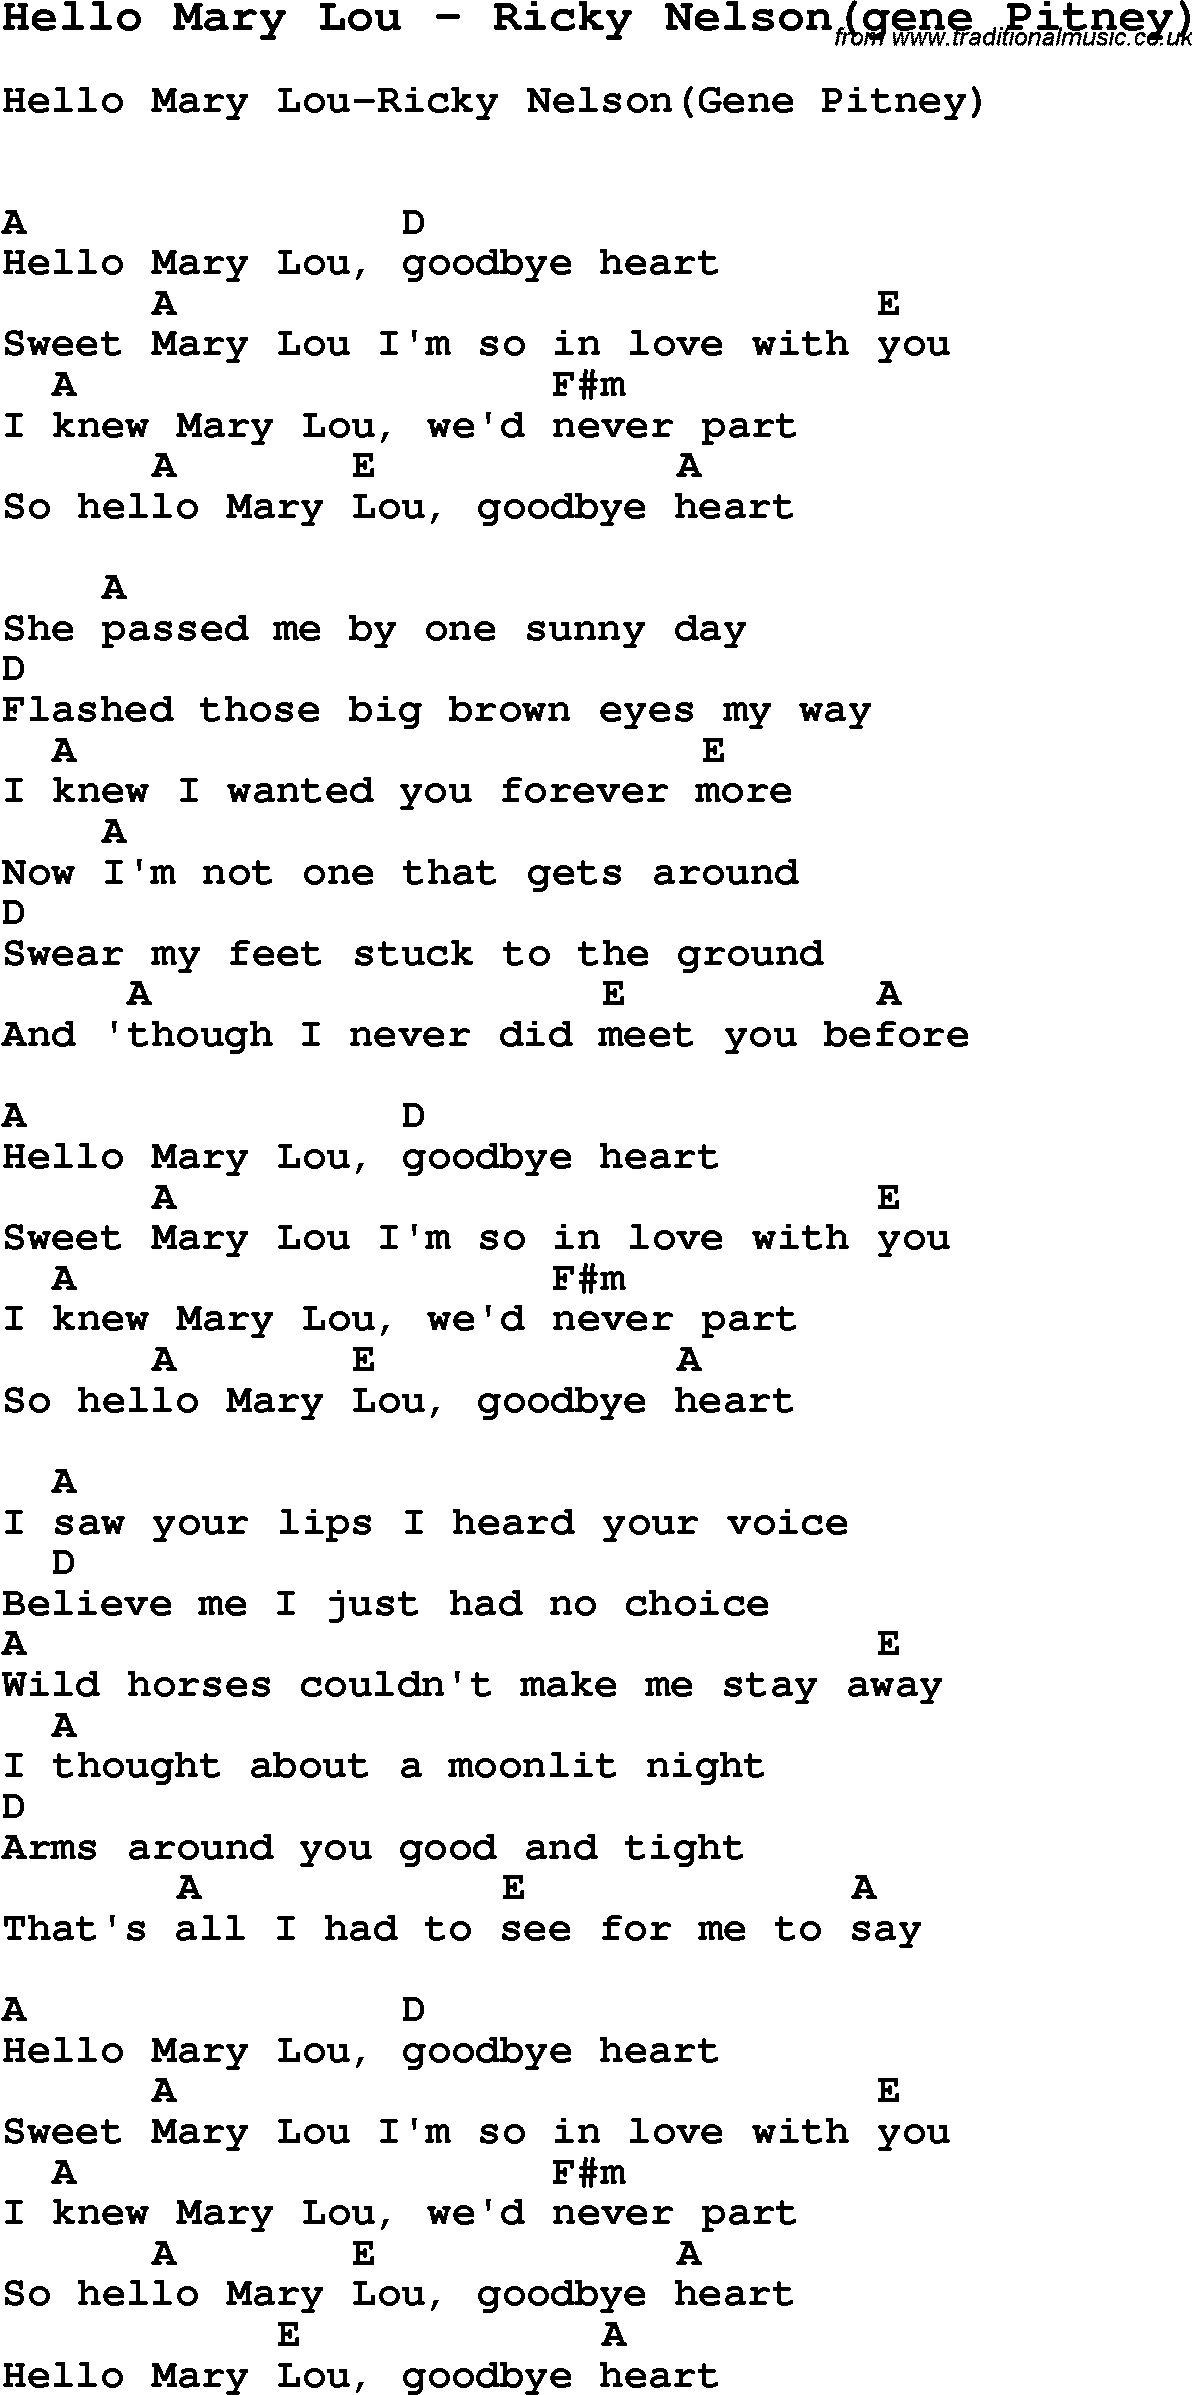 Song Hello Mary Lou by Ricky Nelson(gene Pitney), with lyrics for vocal performance and accompaniment chords for Ukulele, Guitar Banjo etc.